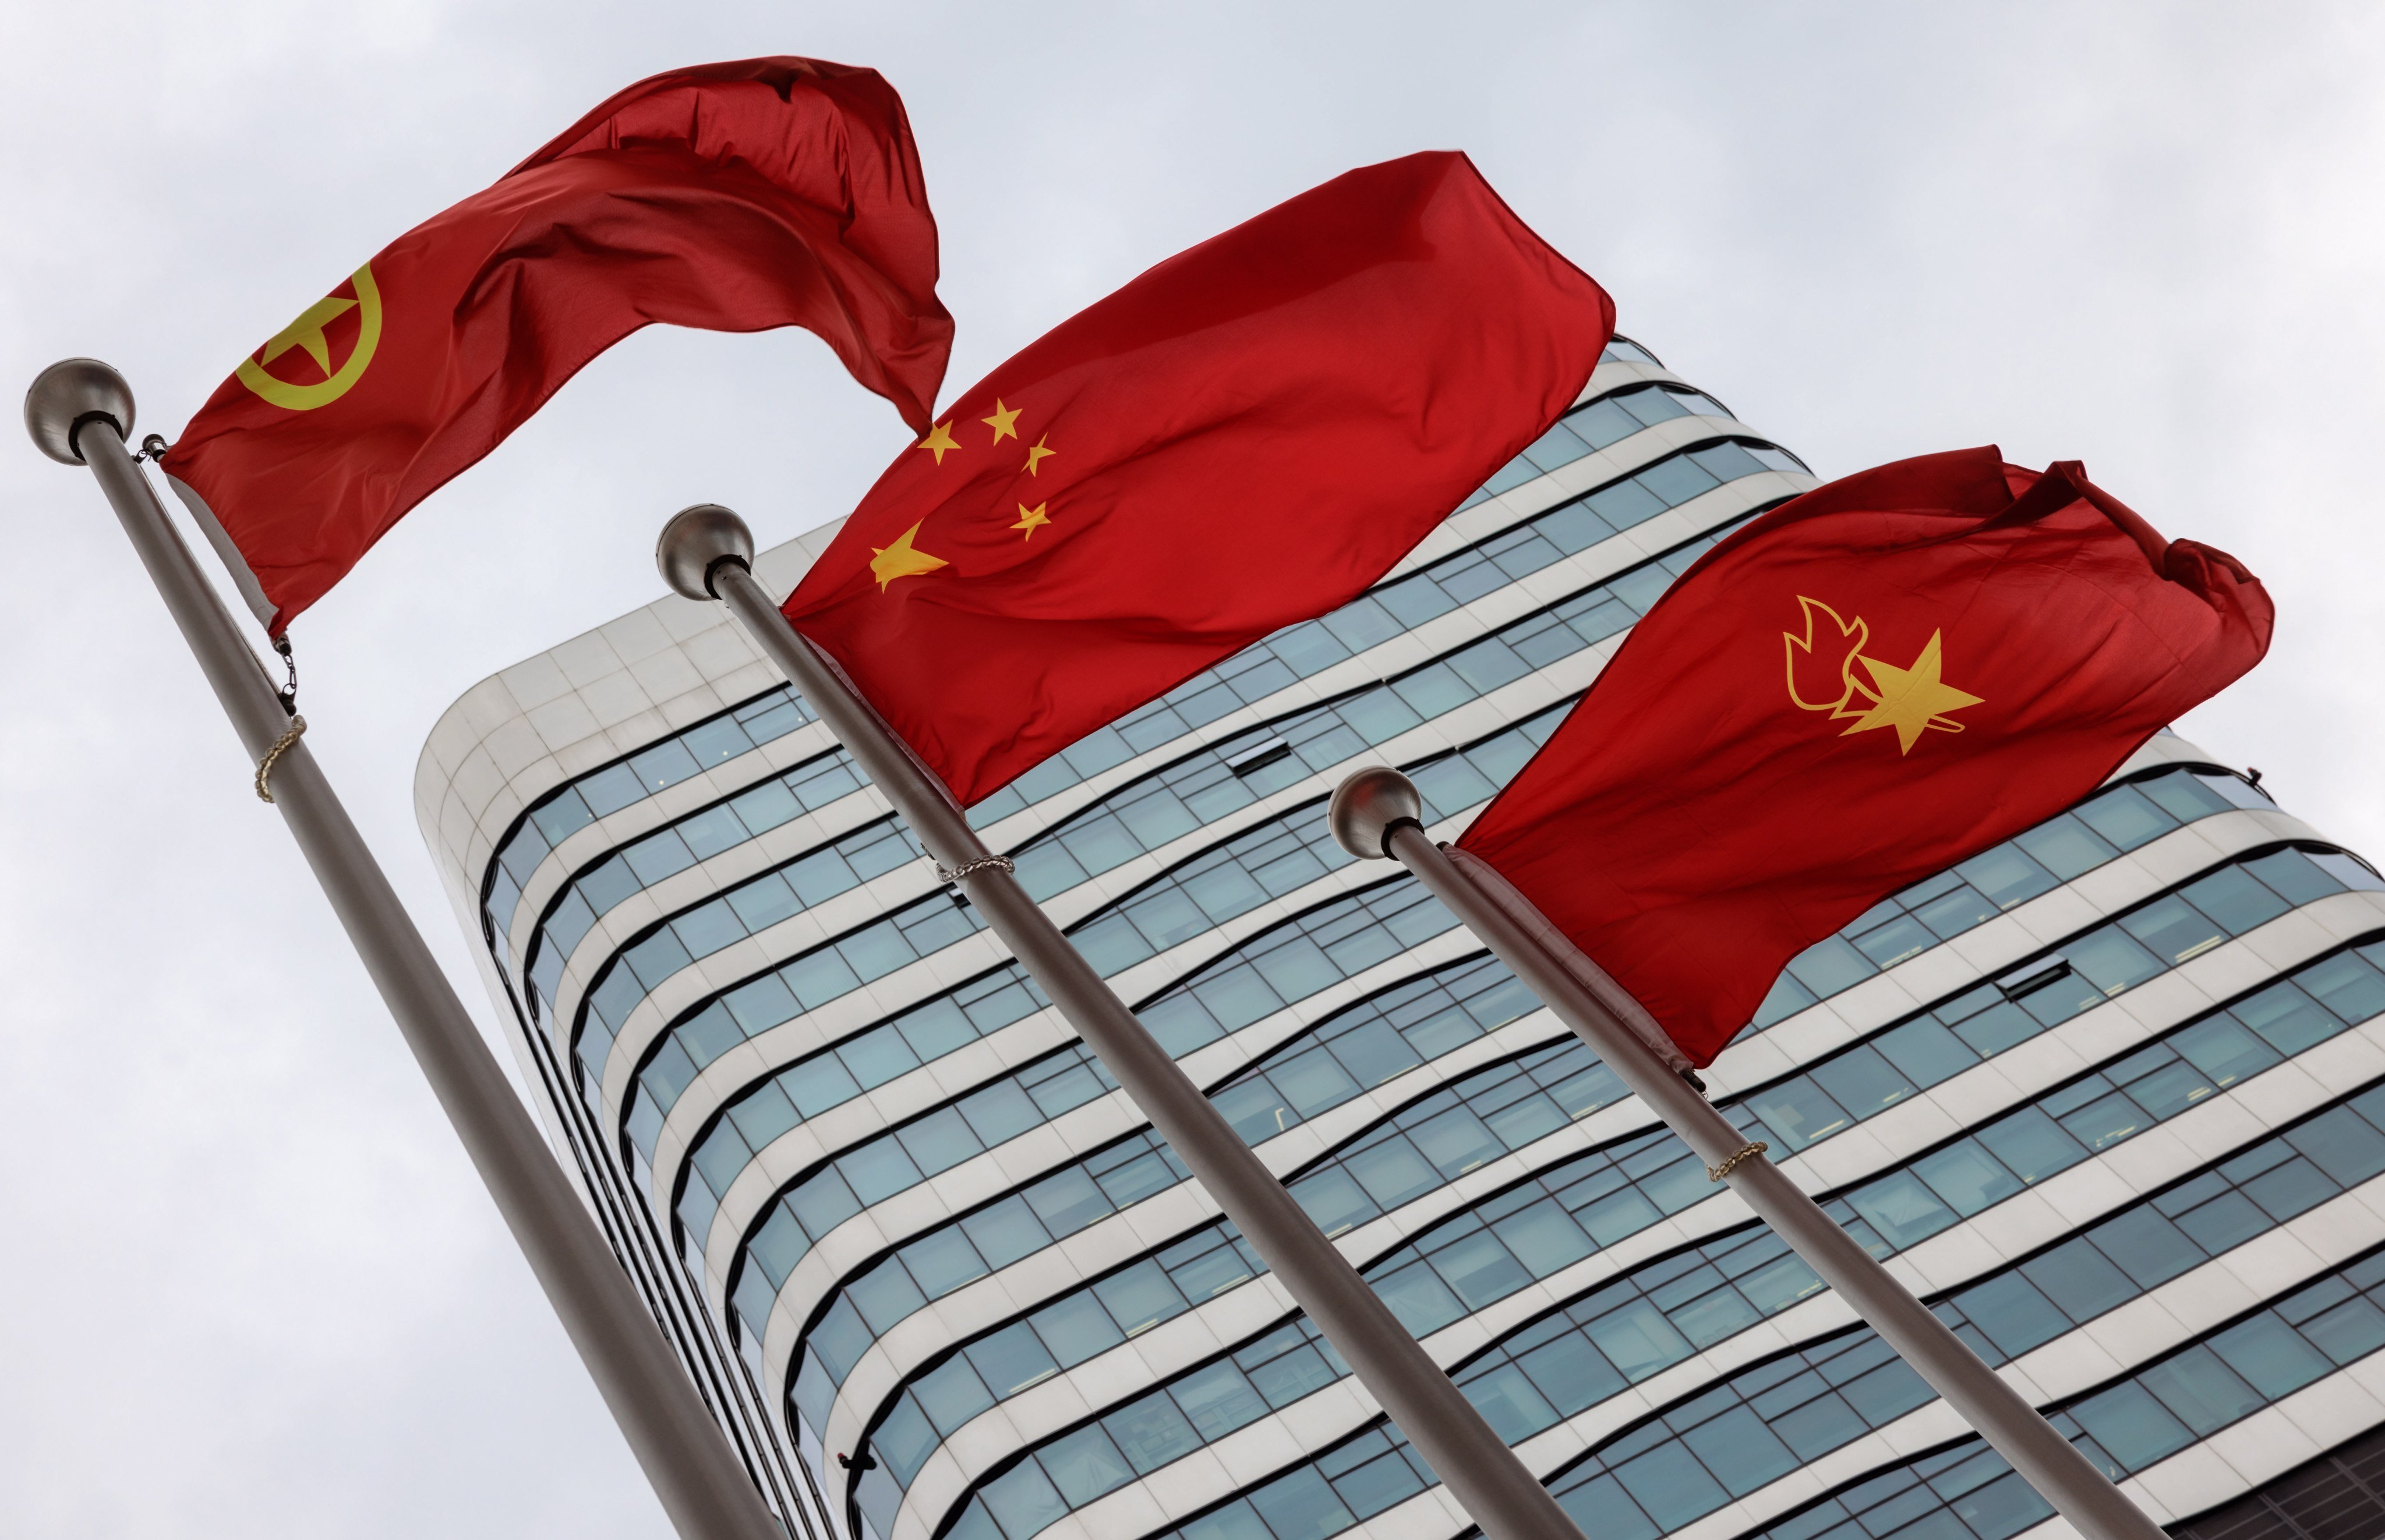 Flags stand in front of the Capvision Partners headquarters building in Shanghai, China. Photo: EPA-EFE